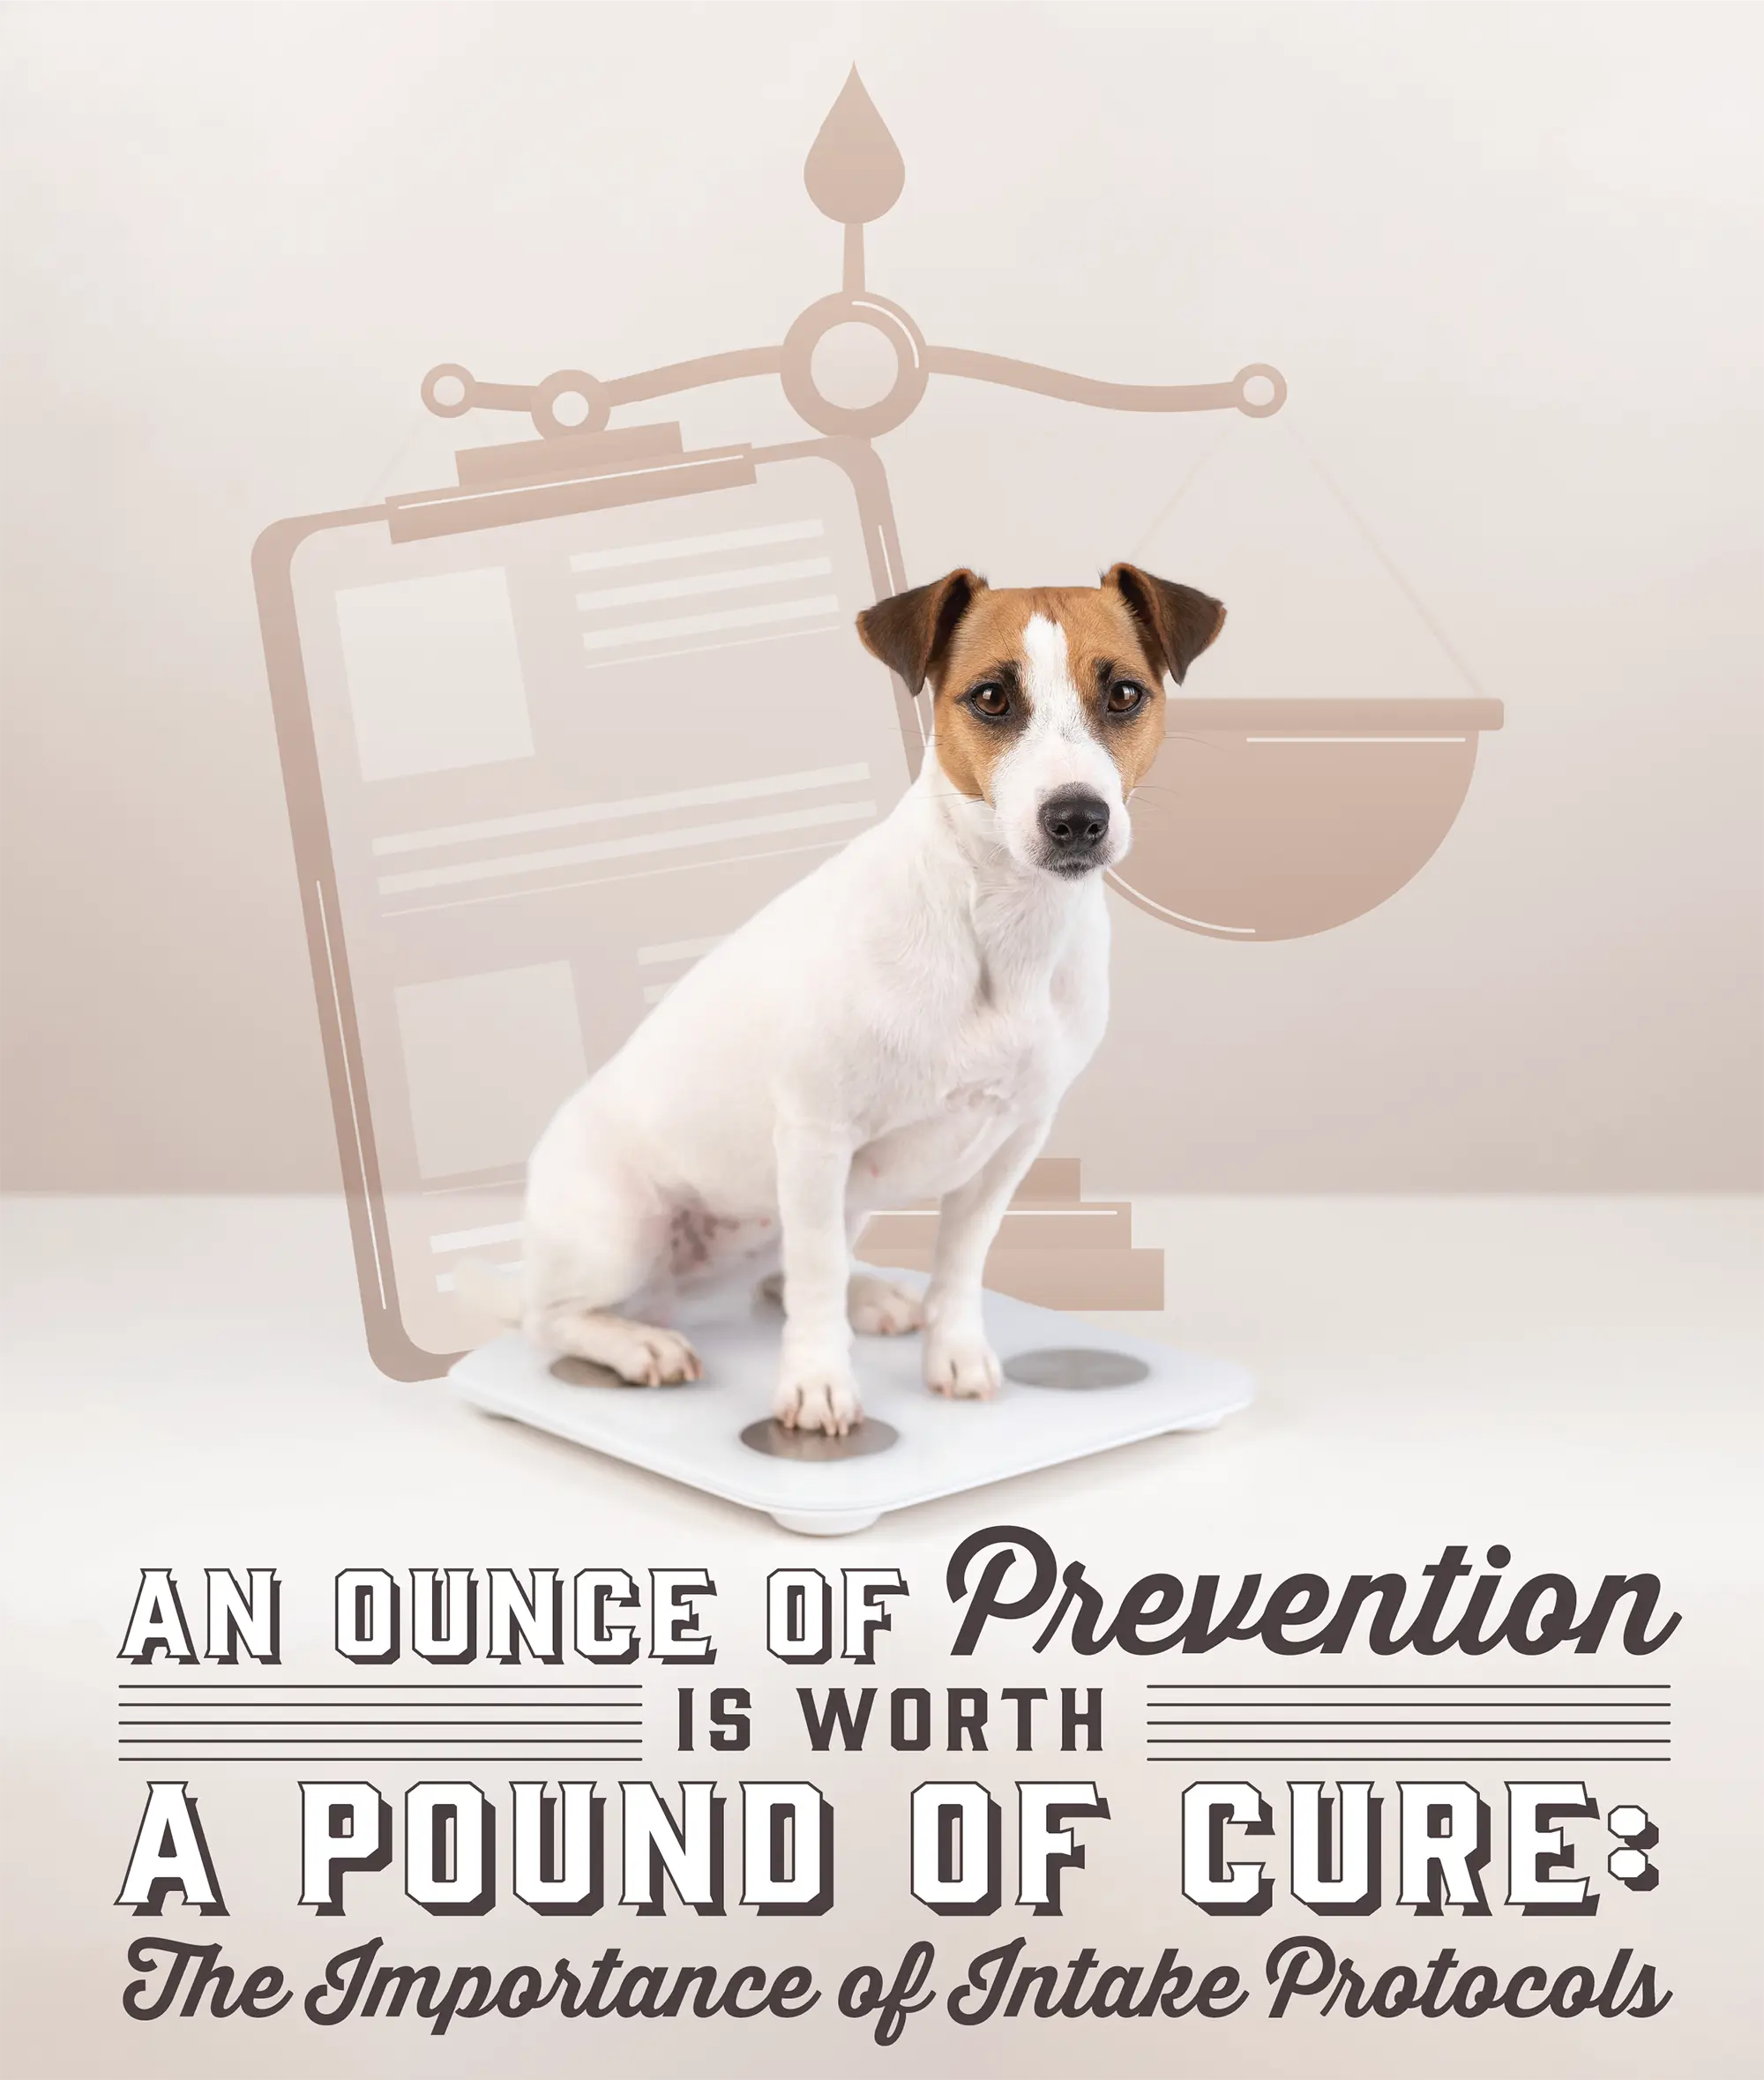 Dog on top of a small weight scale and vector minimalist illustration of a clipboard with a document and bigger weight justice scale behind the dog plus typographic title (An Ounce of Prevention is Worth A Pound of Cure: The Importance of Intake Protocols) on top of a faded light brown gradient background